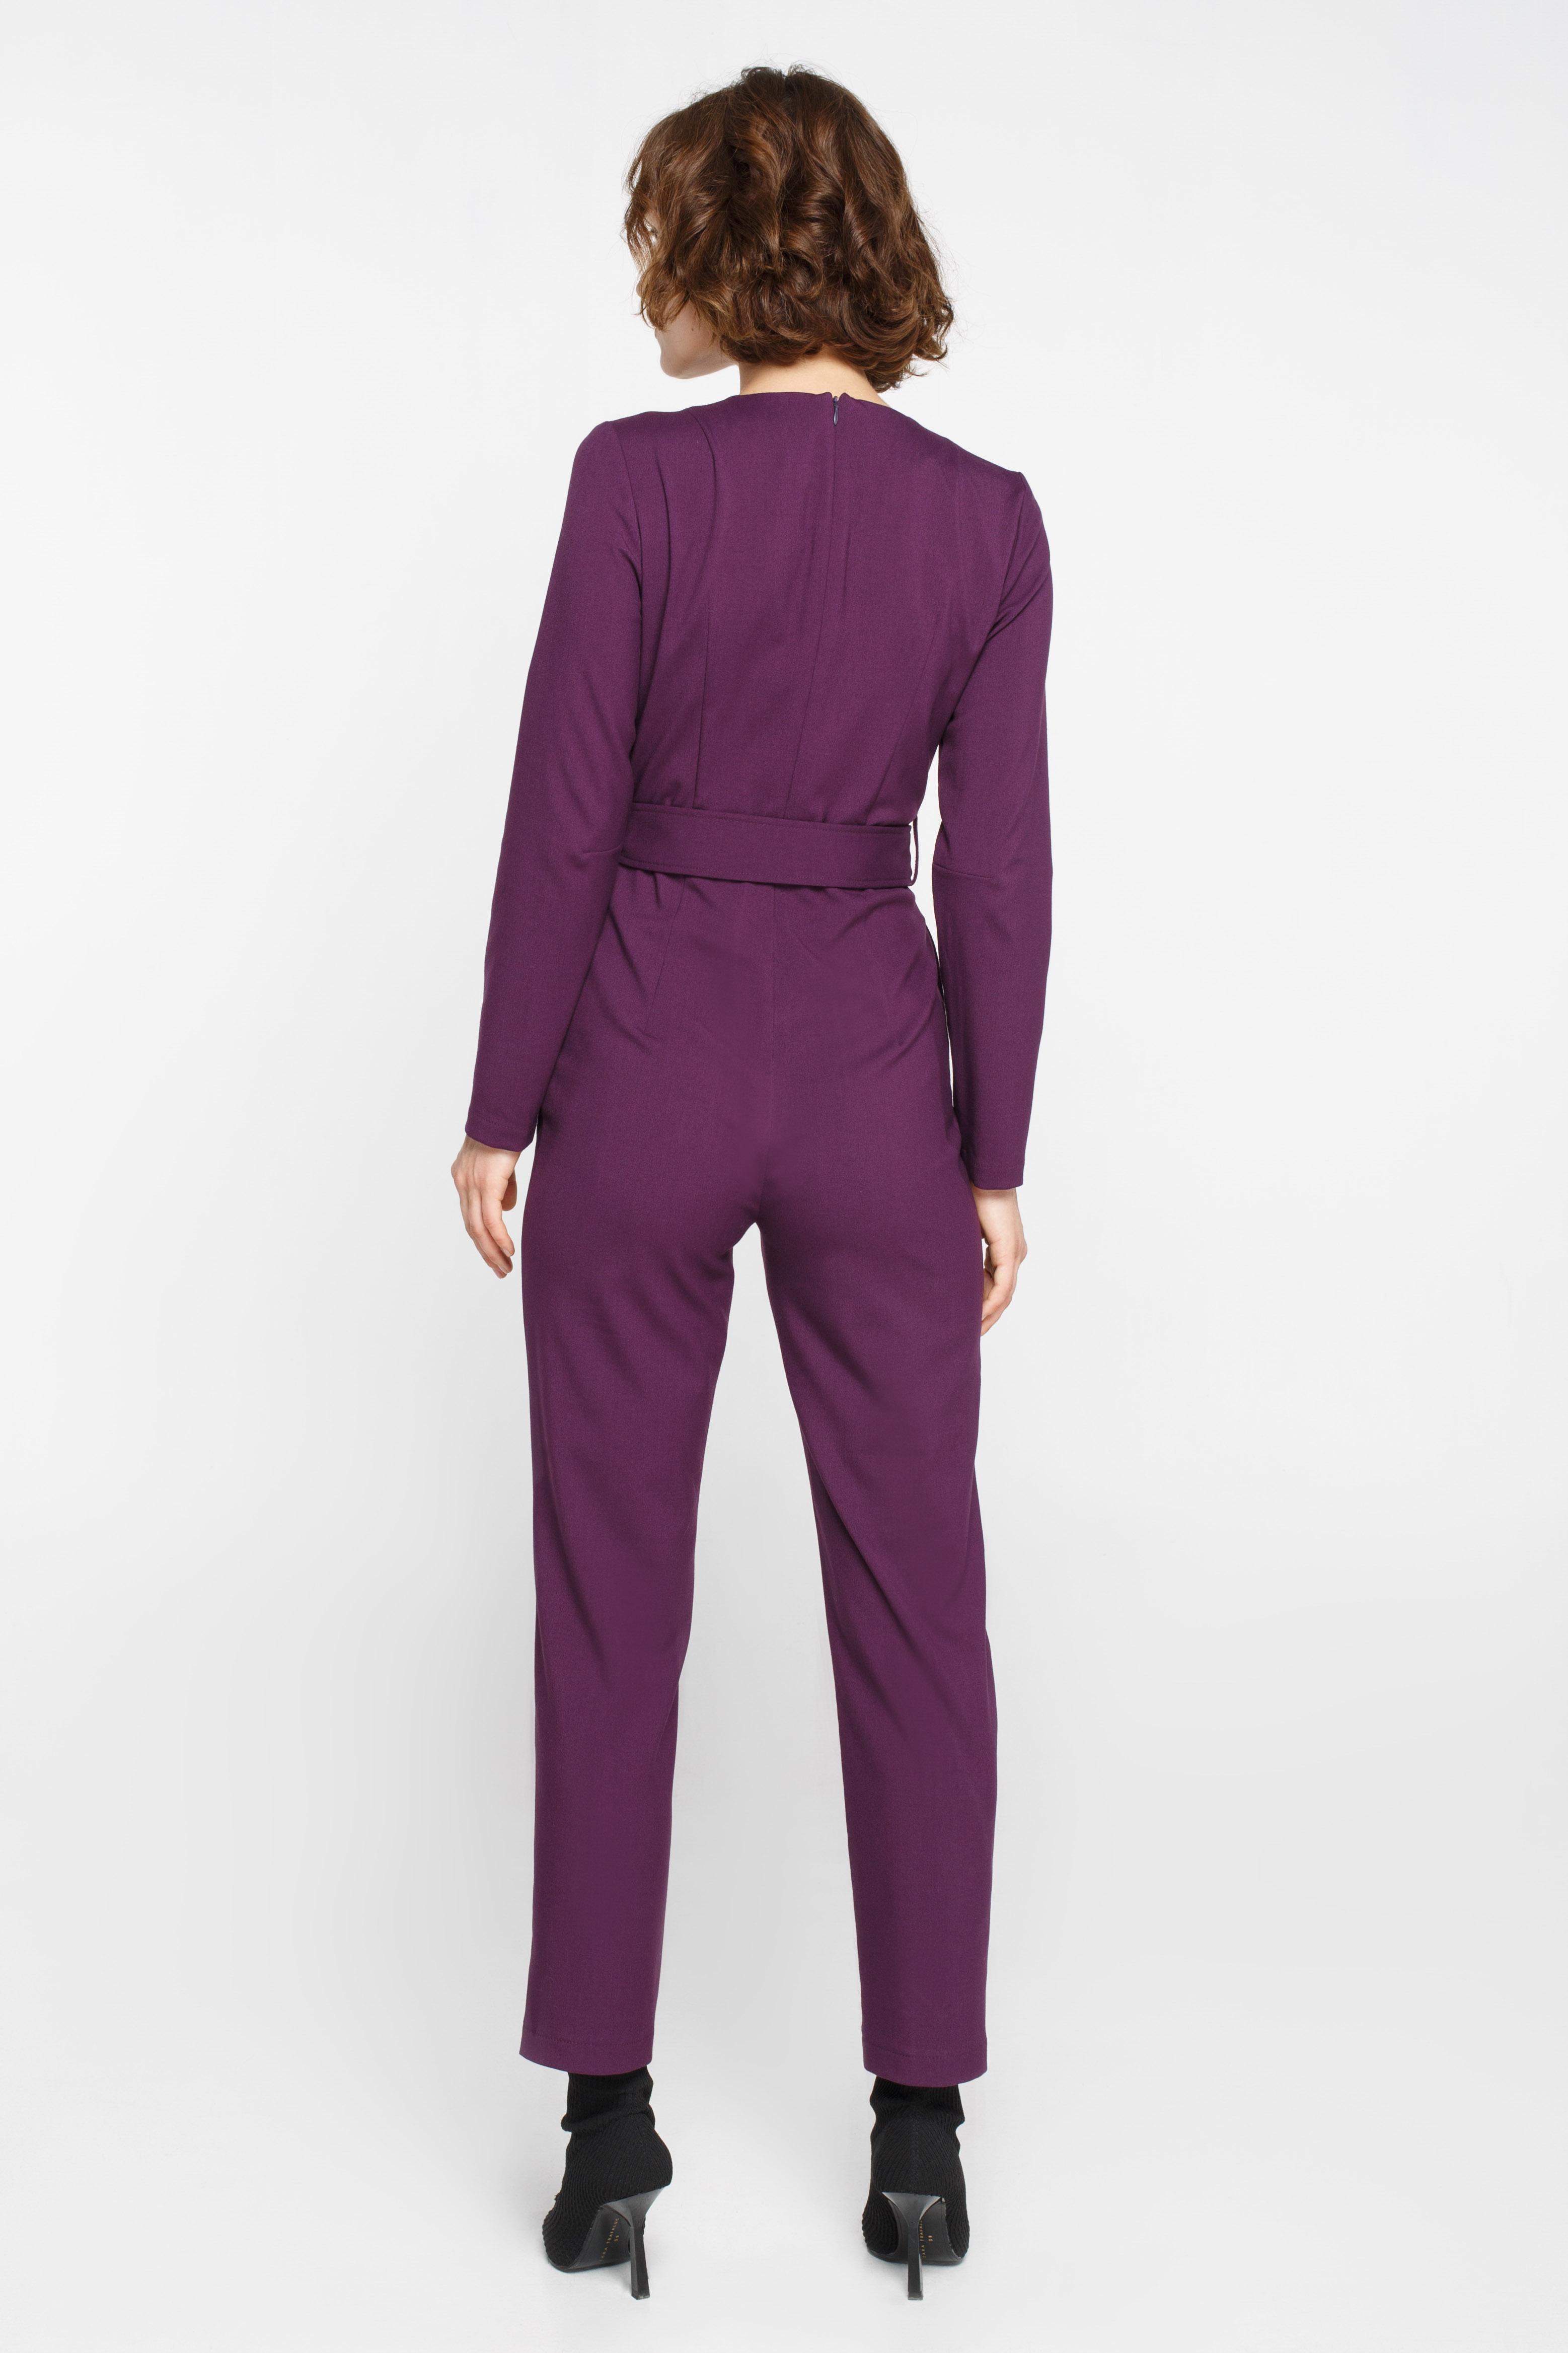 Purple jumpsuit with long sleeves and a belt, photo 5